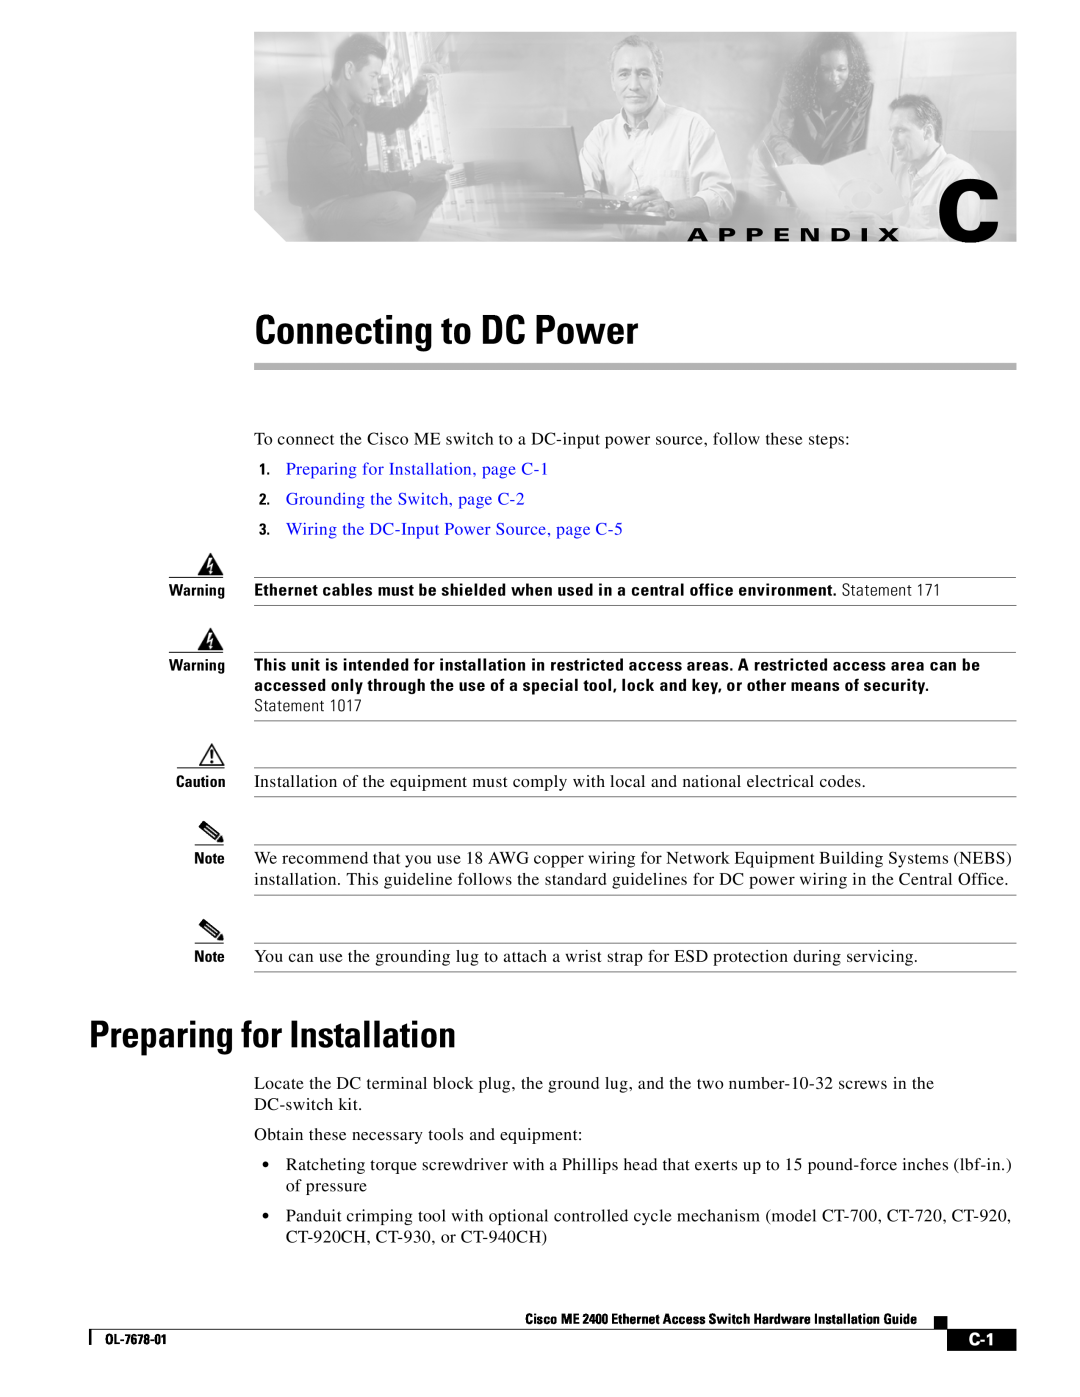 Cisco Systems ME 2400 manual Connecting to DC Power, A P P E N D I X C, Preparing for Installation 